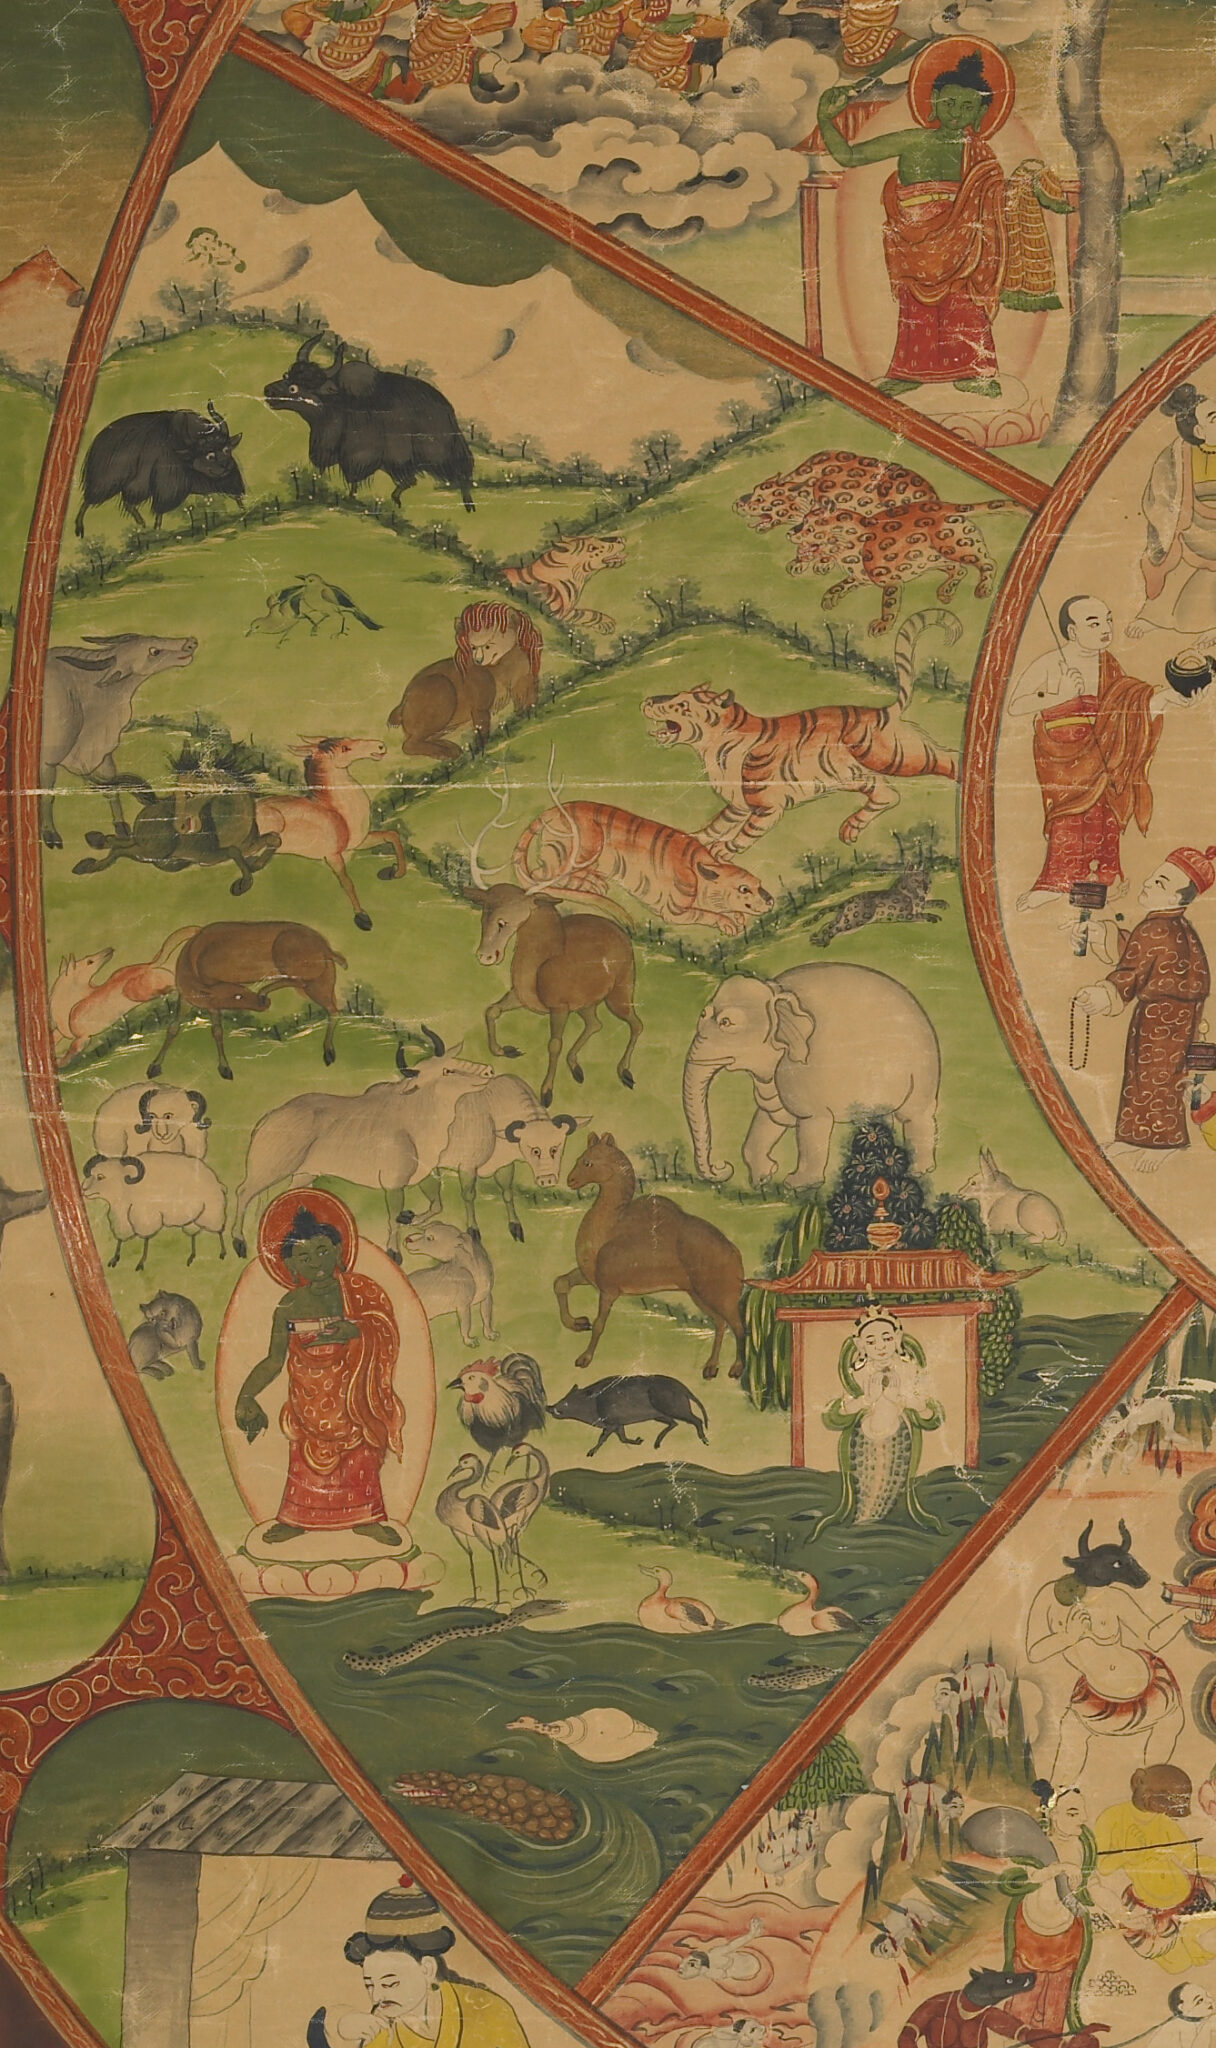 Scene depicting green-skinned Buddha amongst animals of all kinds in bucolic setting